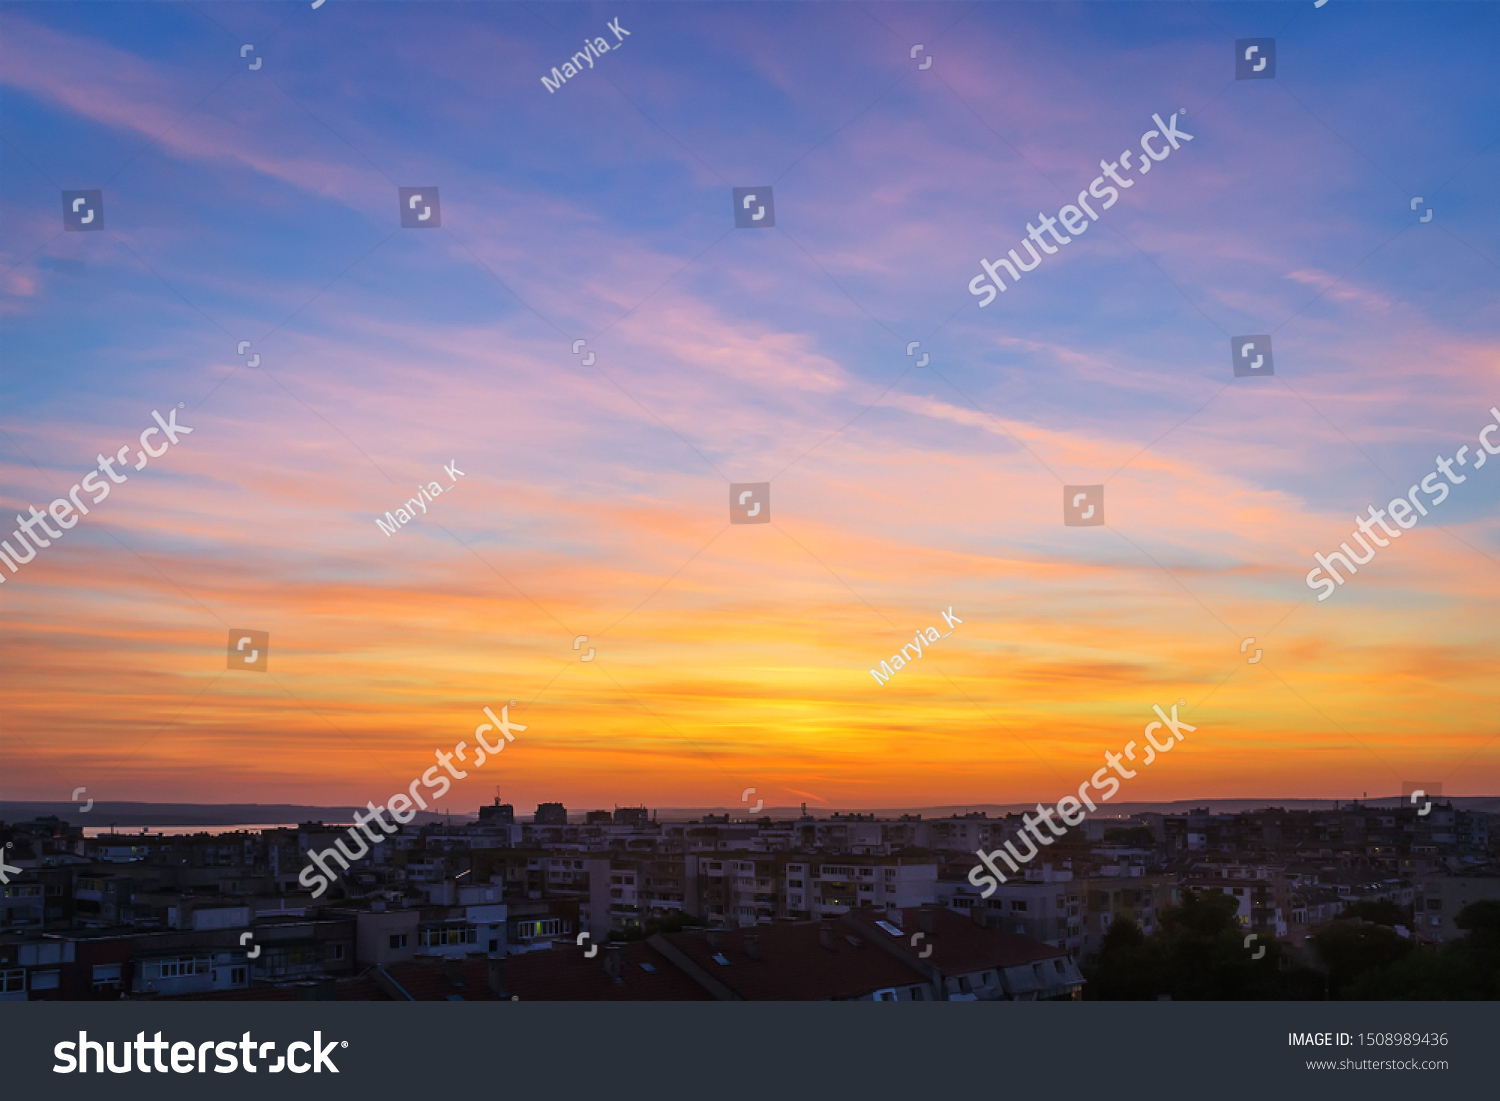 Beautiful skyscape at the sunset time over a small city. Vivid sky of golden and orange colors during sundown. Evening landscape. Beauty in nature. #1508989436